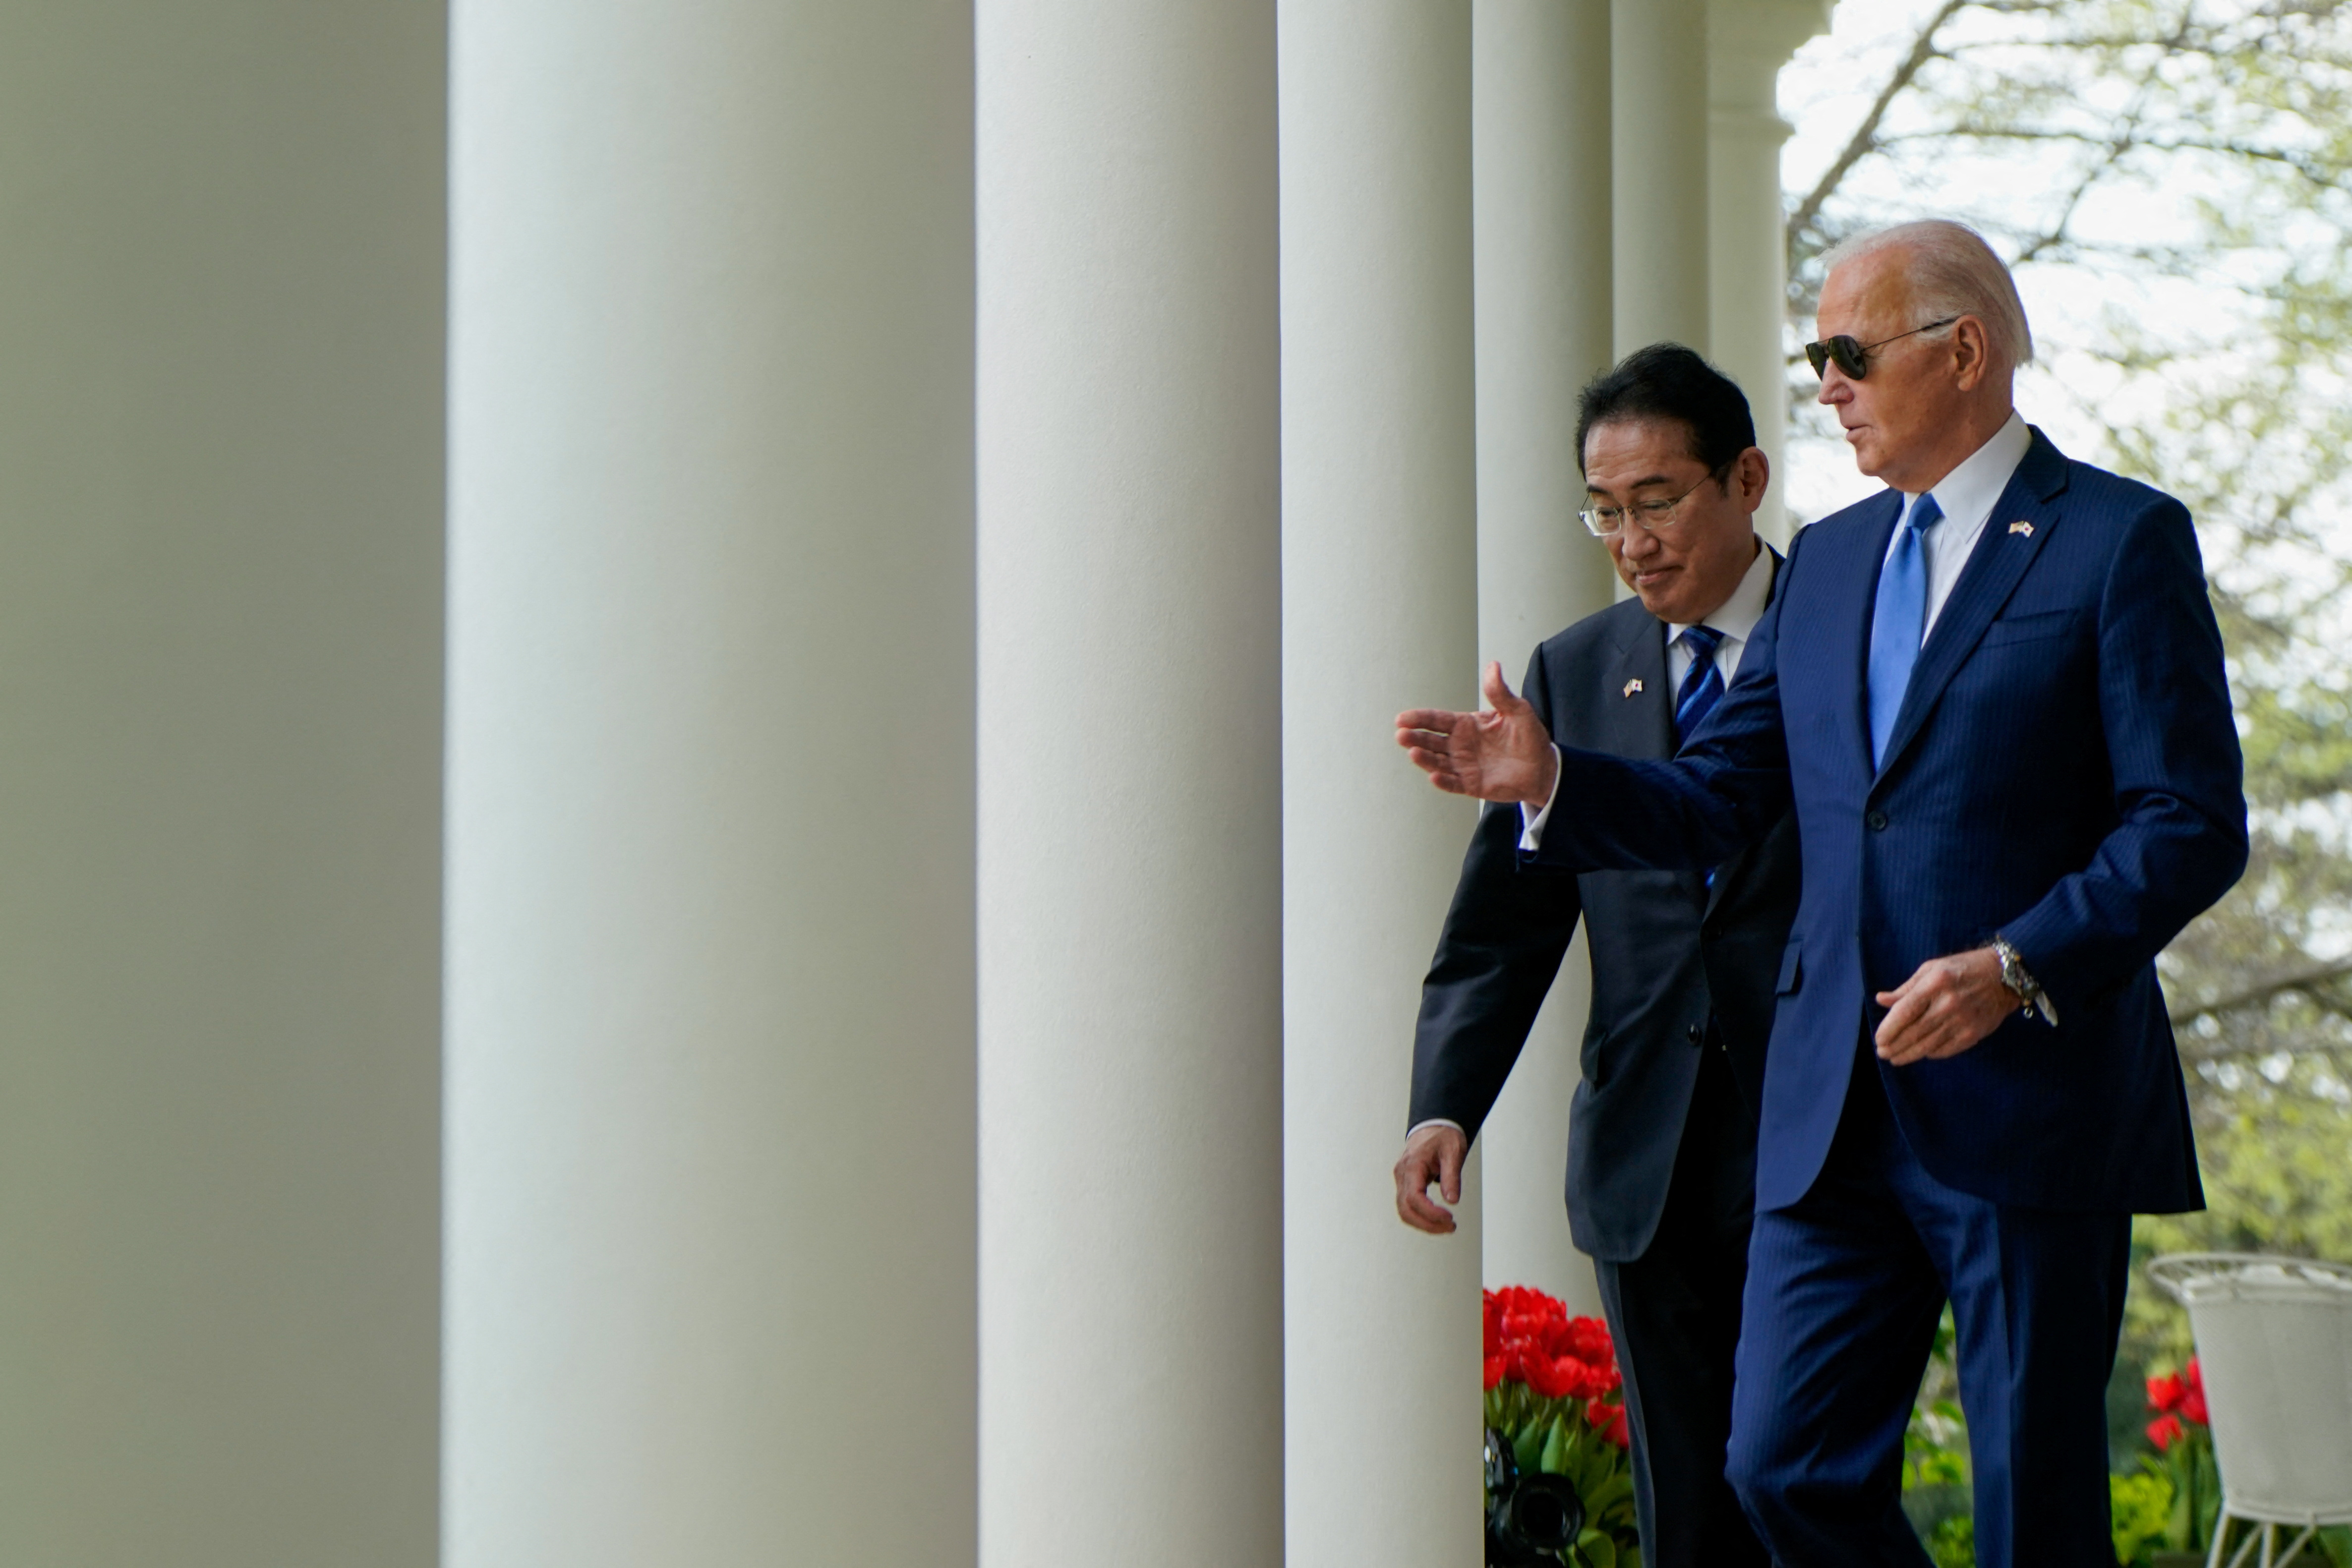 U.S. President Joe Biden and Japanese PM Fumio Kishida hold a joint press conference in the Rose Garden at the White House in Washington